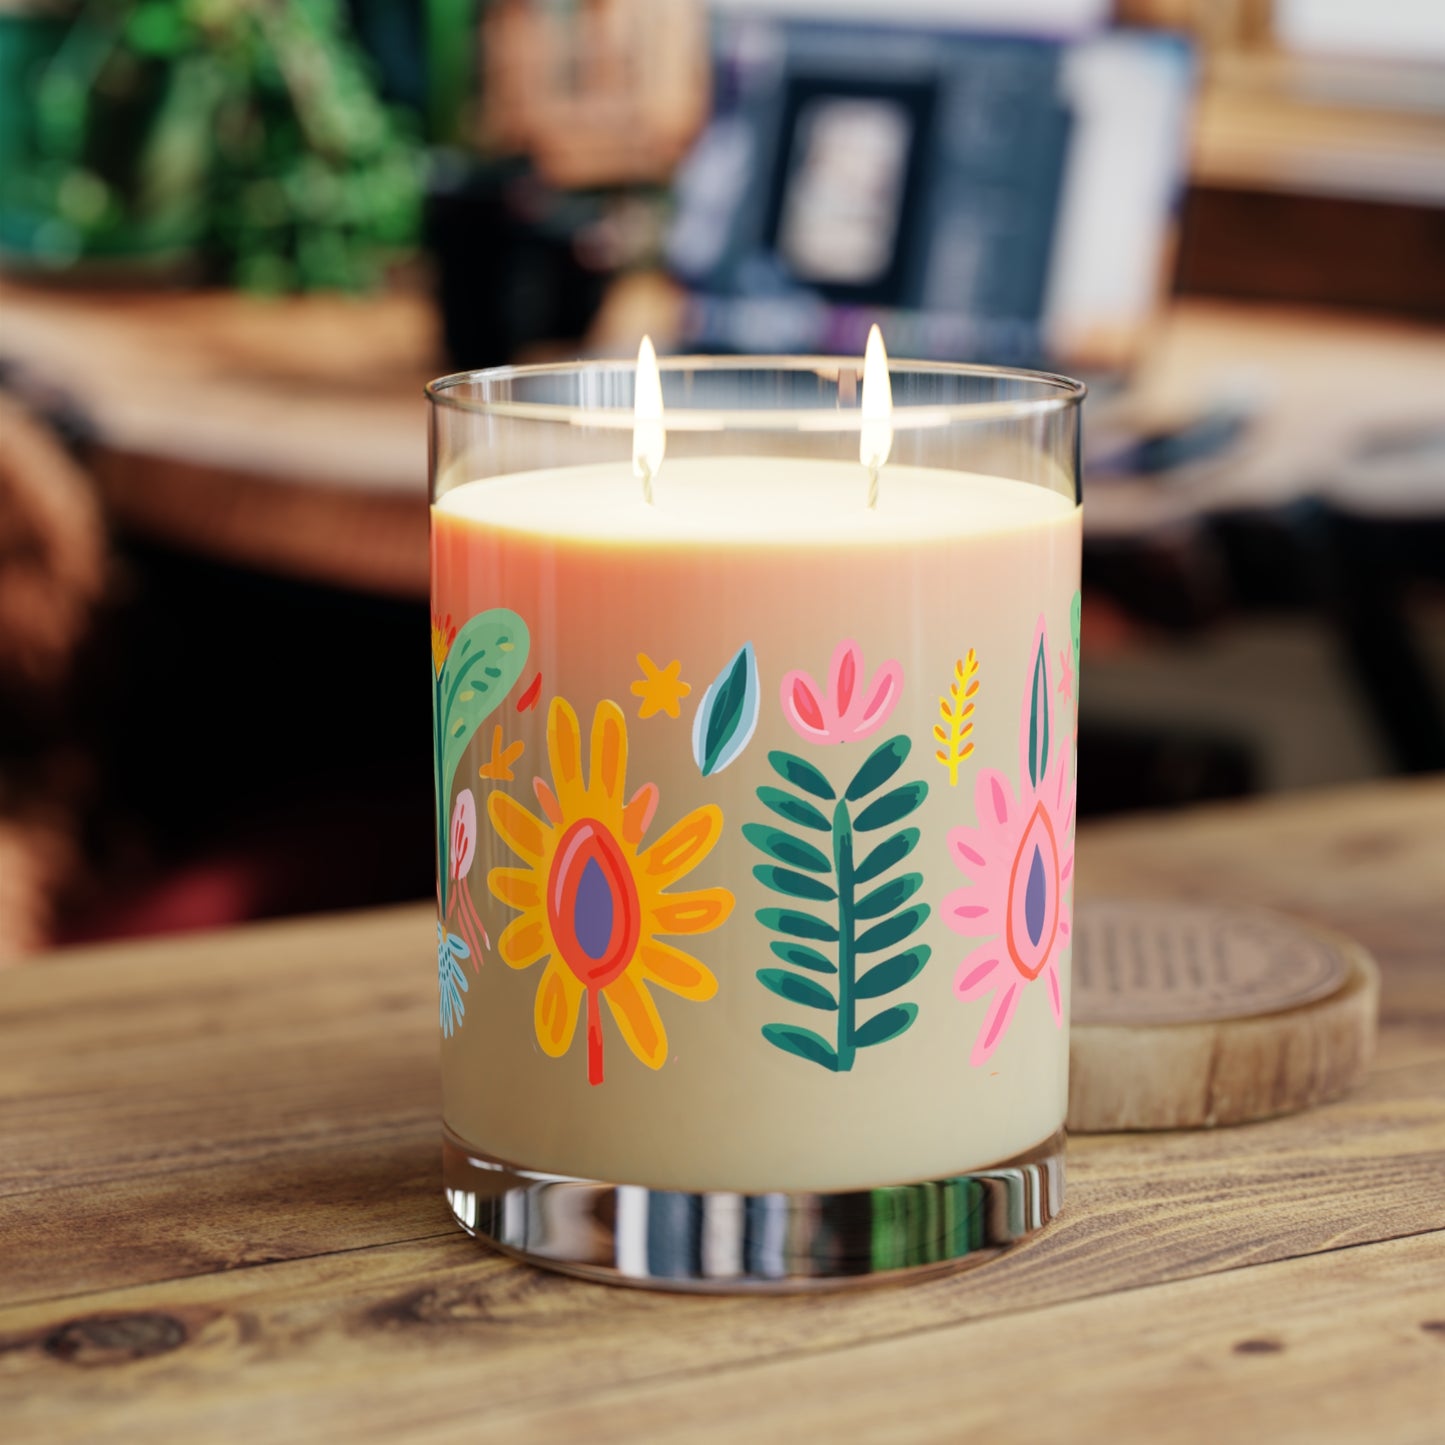 Regenbogen x Seventh Avenue Apothecary Collab // Marbella Scented Candle (3 scents)